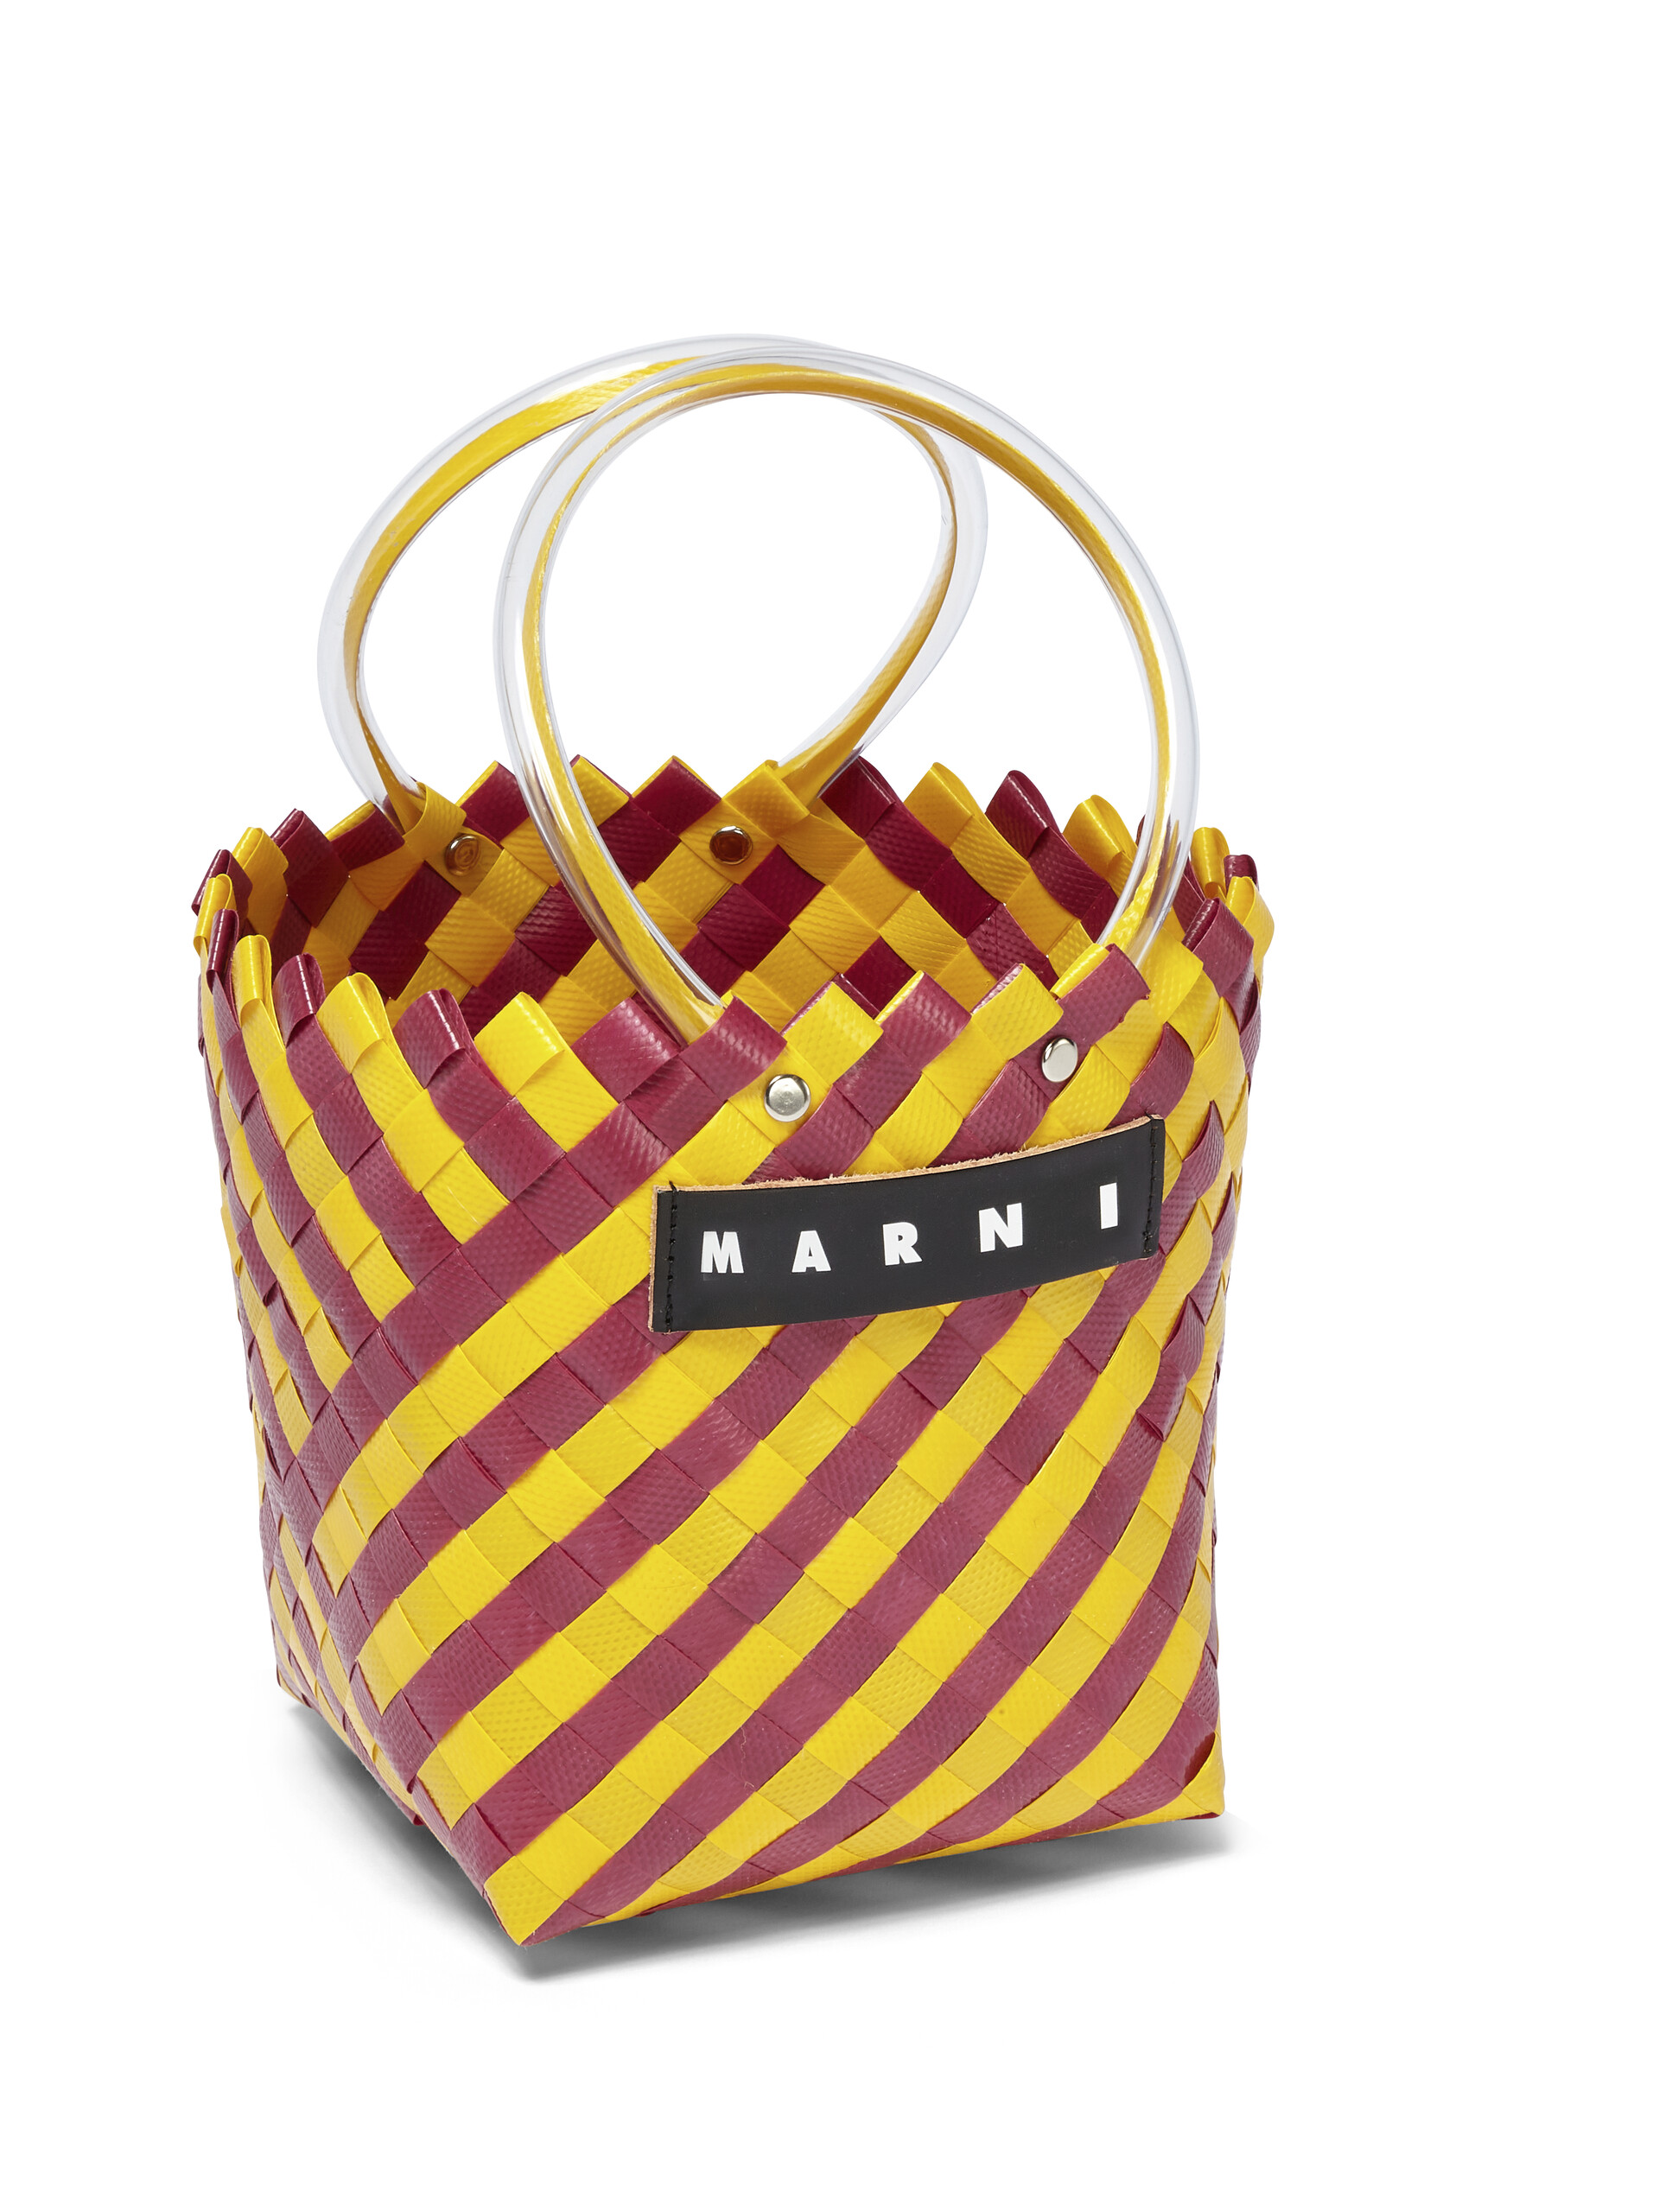 MARNI MARKET TAHA bag in yellow and burgundy woven material - Shopping Bags - Image 4